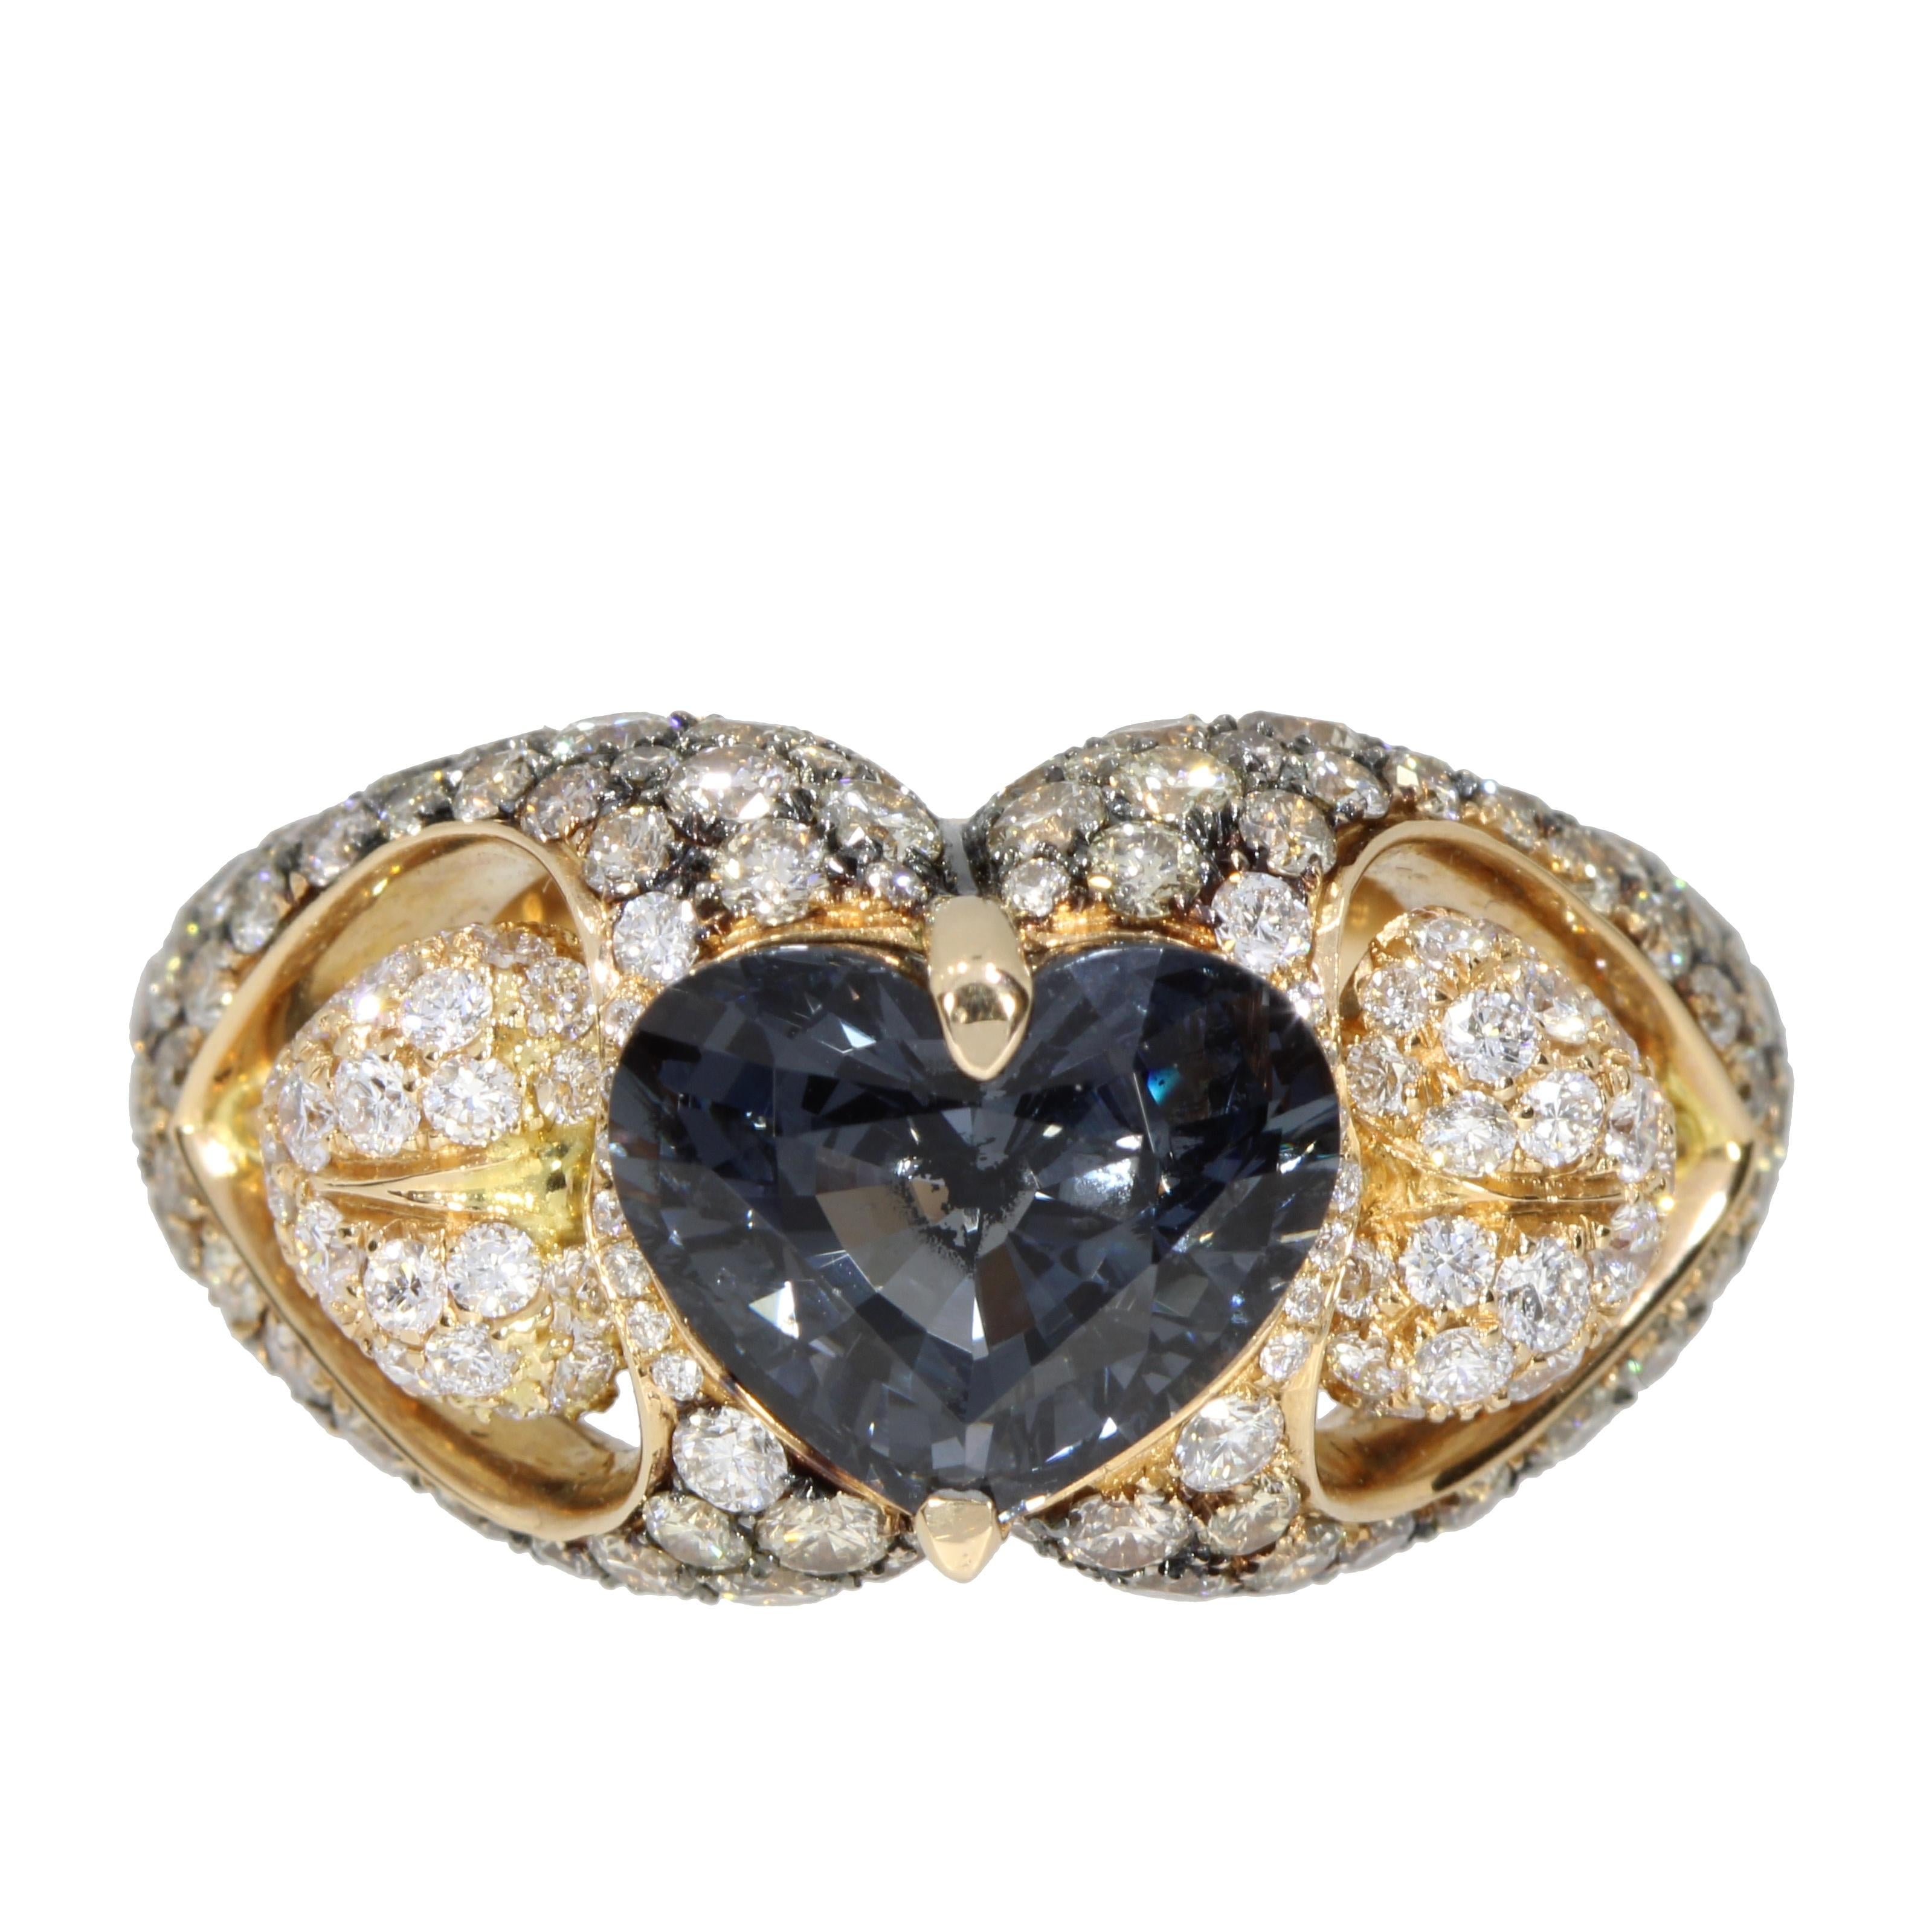 A captivating Blue Grey heart Spinel is the centre of two White diamonds pave hearts suspended ..... the hearts are surrounded by a glittering pave of black diamonds stones

This ring is an original new engagement ring but also the perfect present